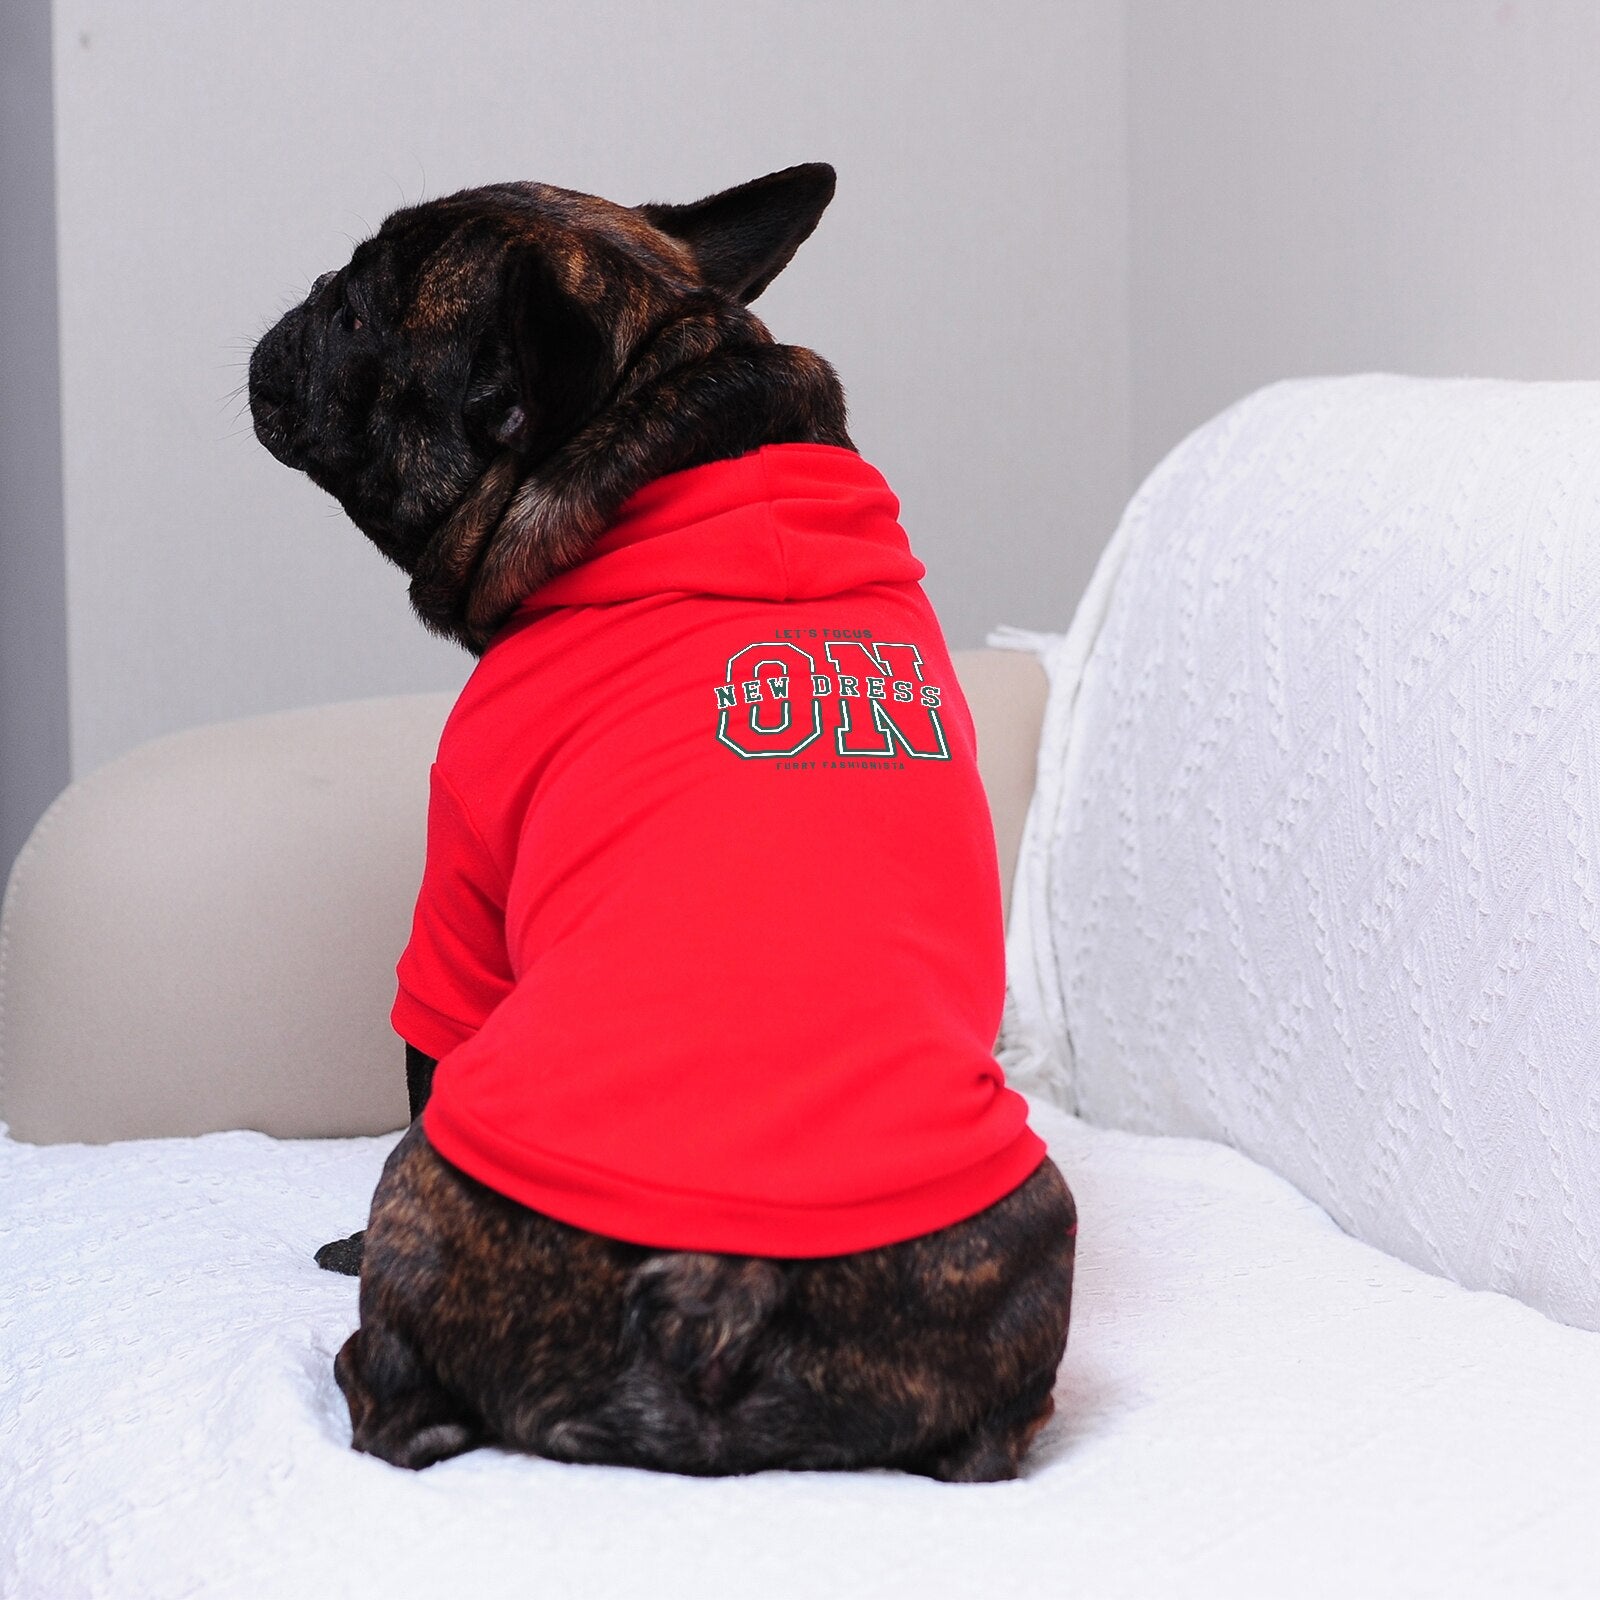 Hoodie Dog Clothes Stripe Red White Printed Letter Small Medium Big Dog Pet Cat 2022 New